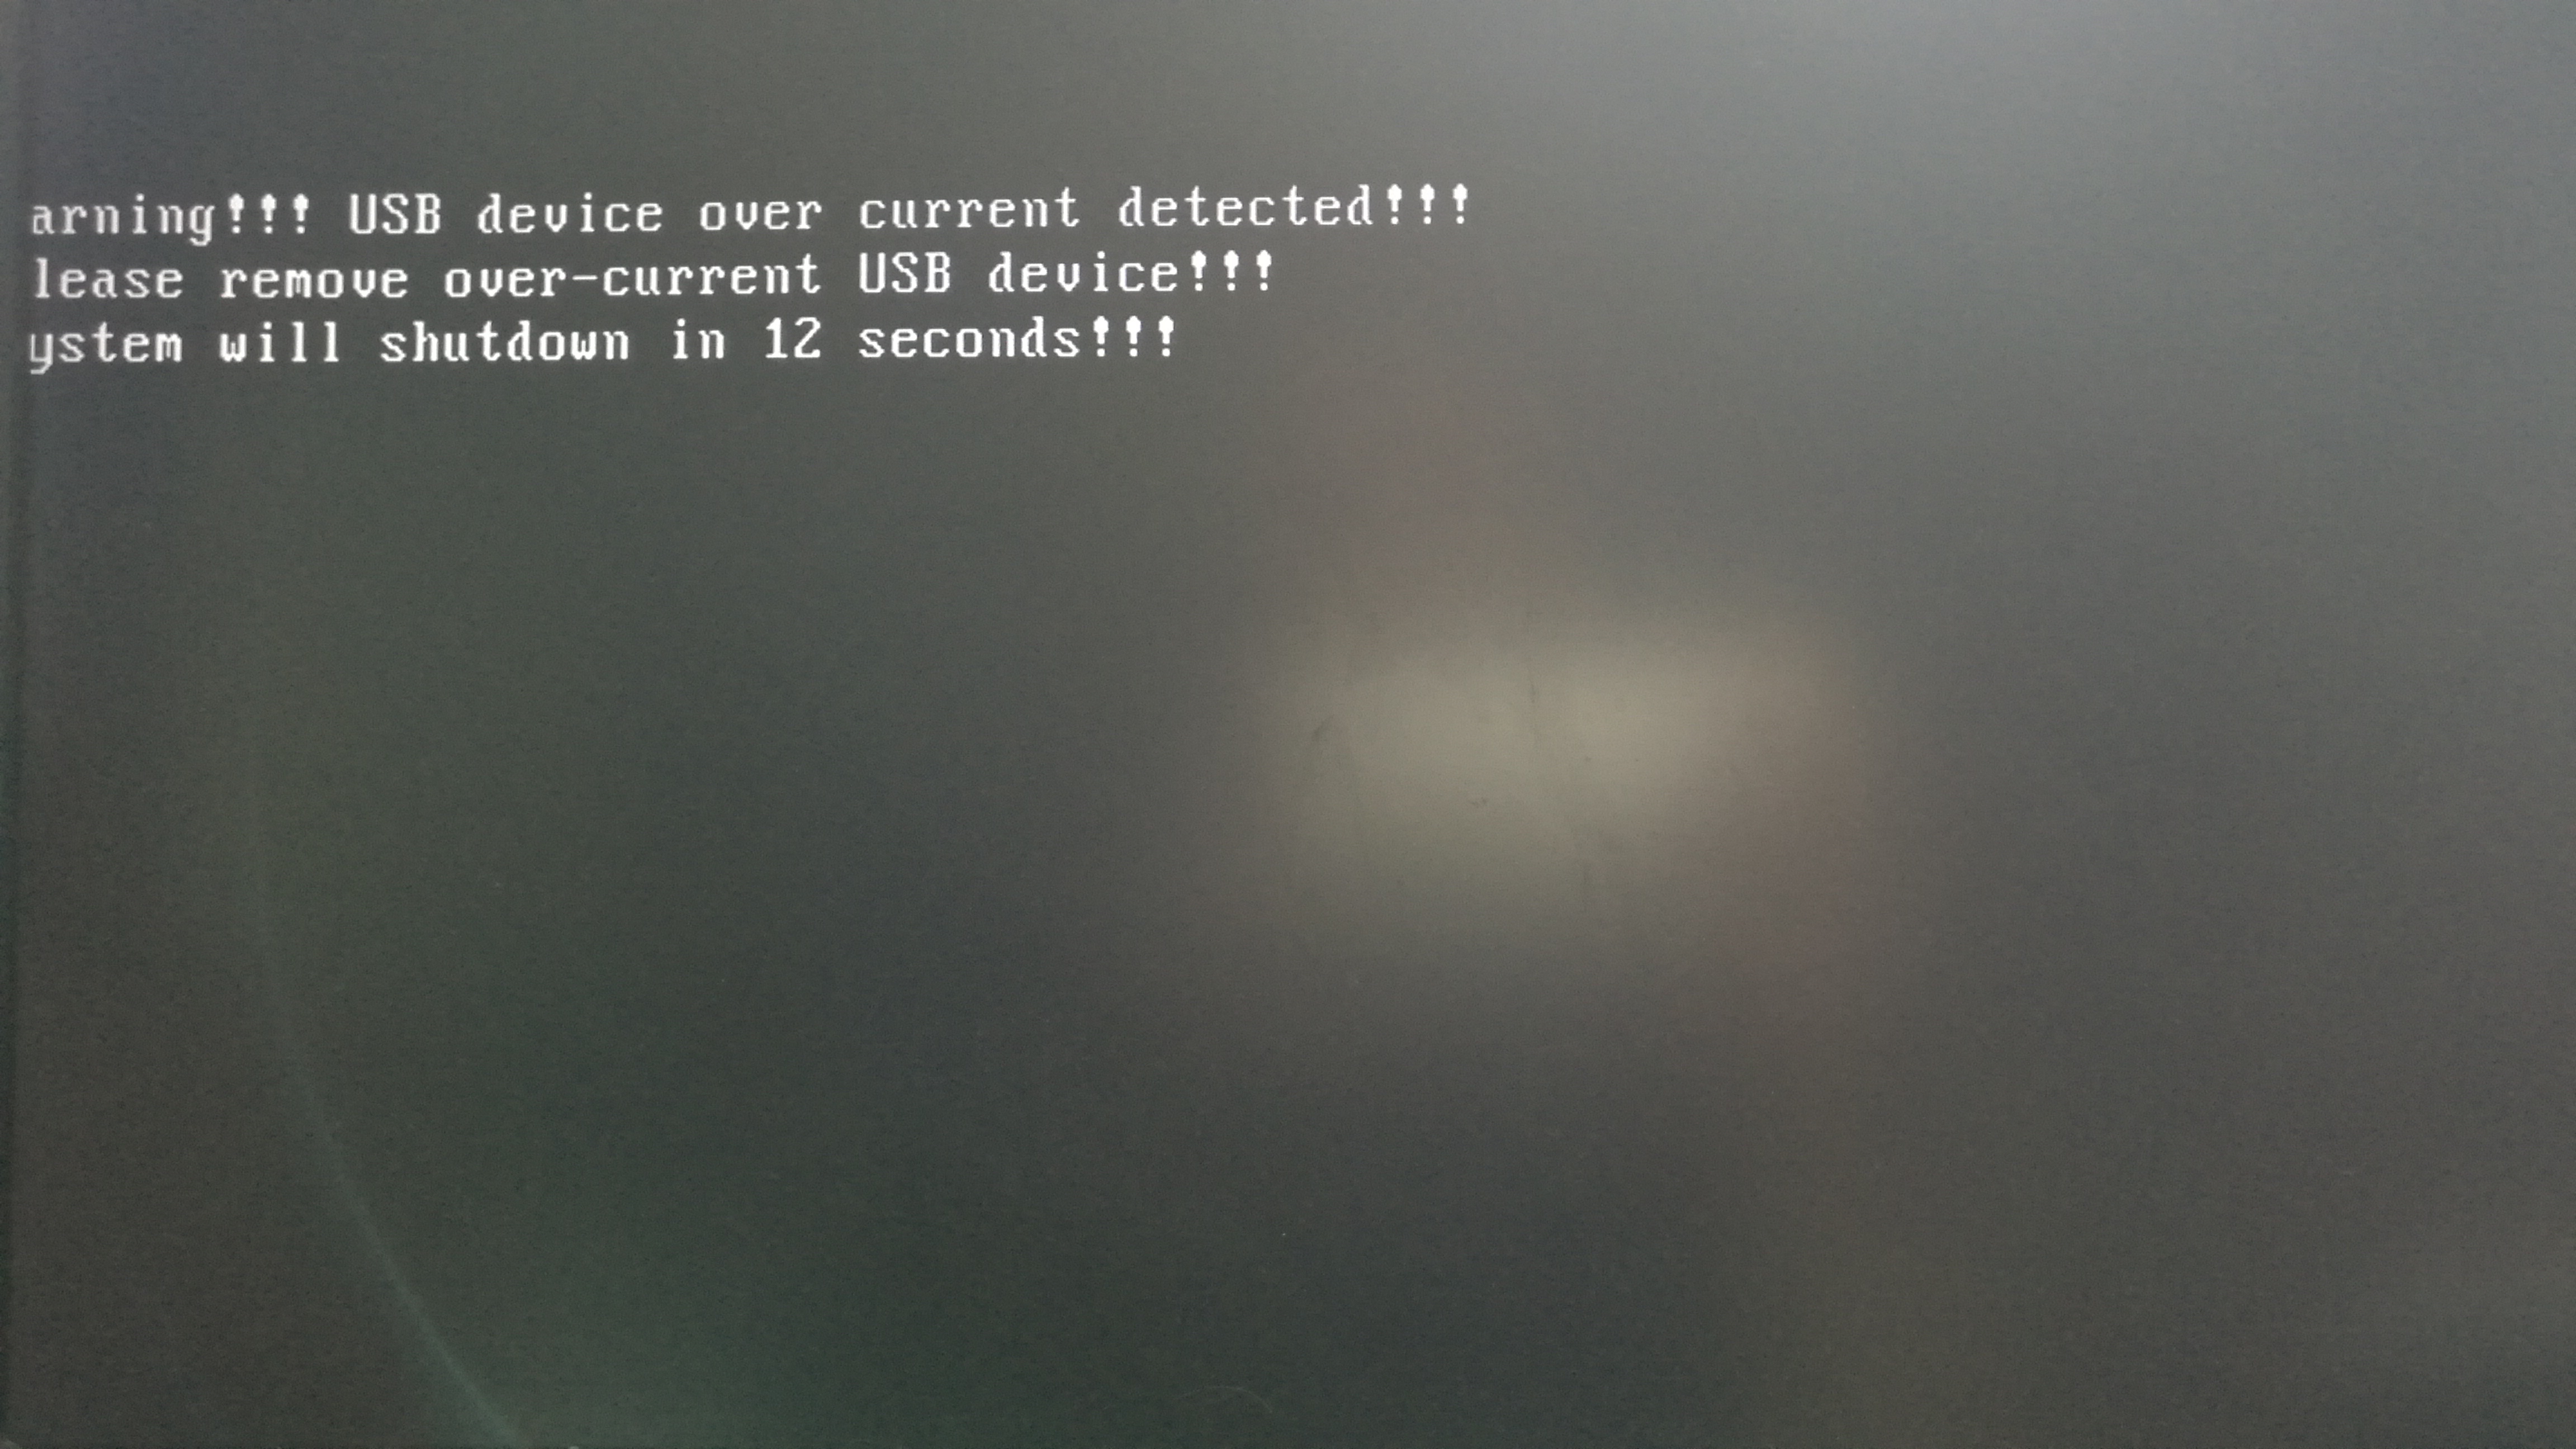 Device over current status detected. USB device over current status detected.